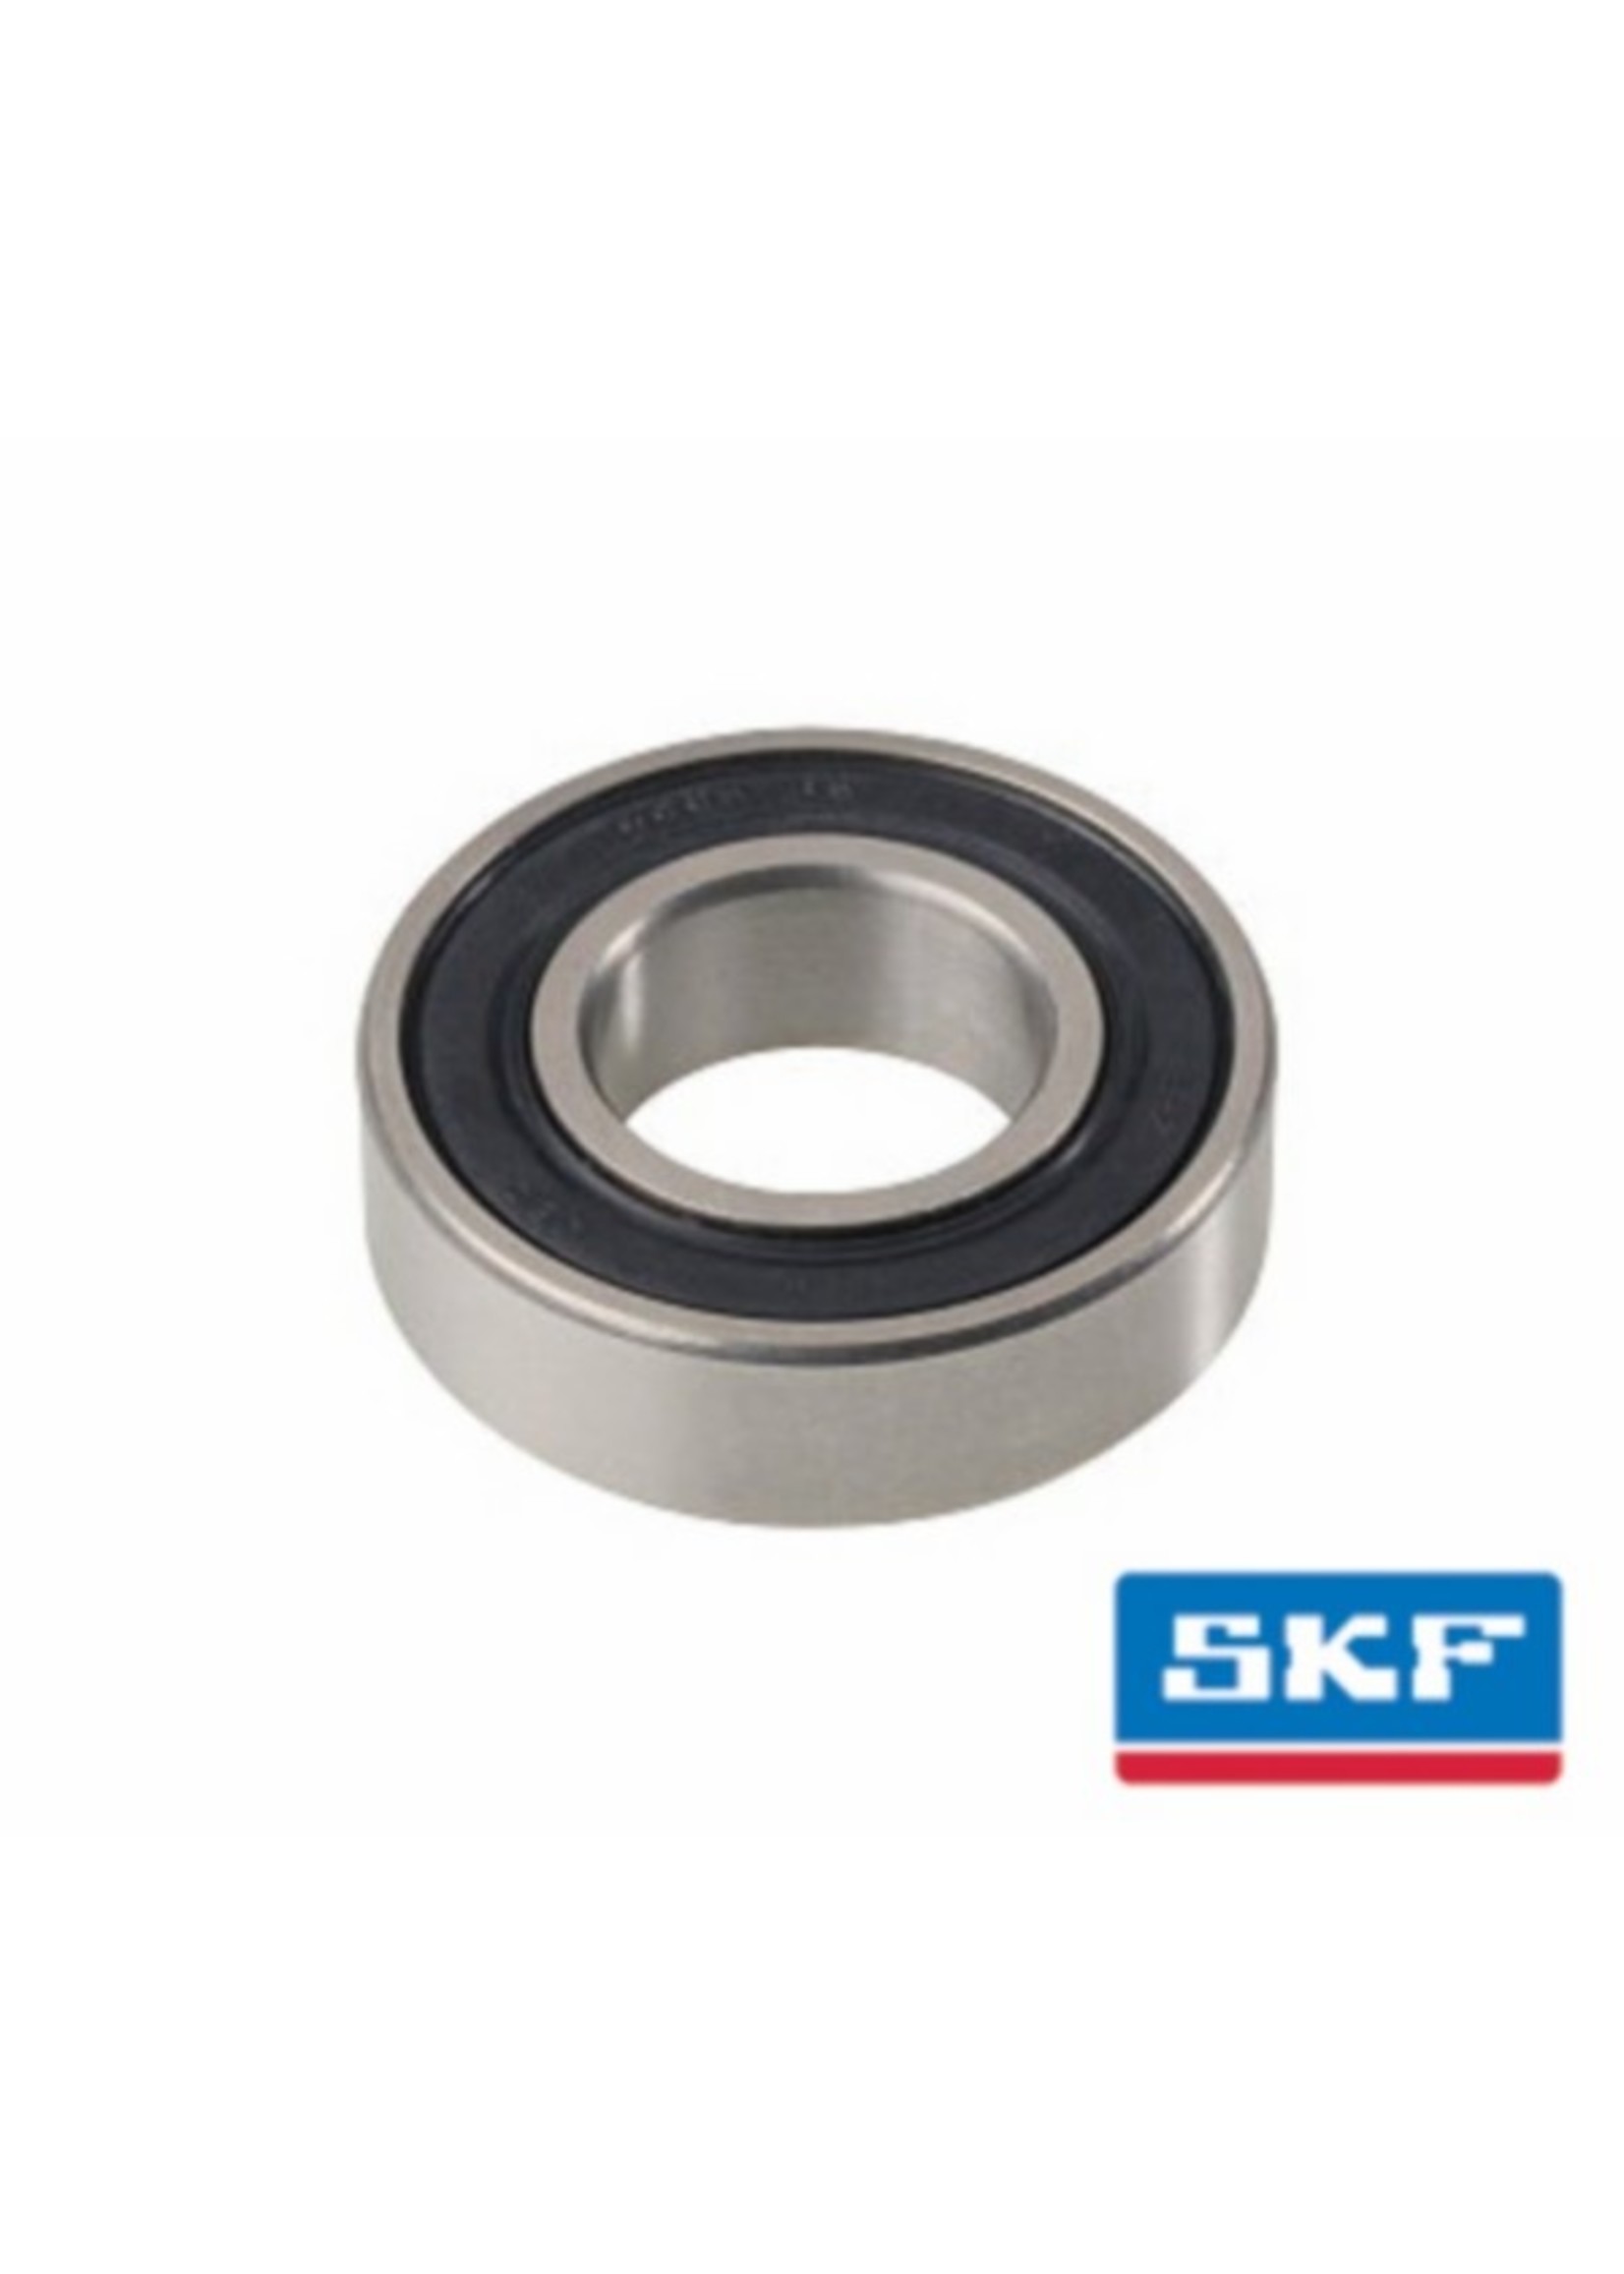 lagers lager 6001 2rs1 12x28x8 skf